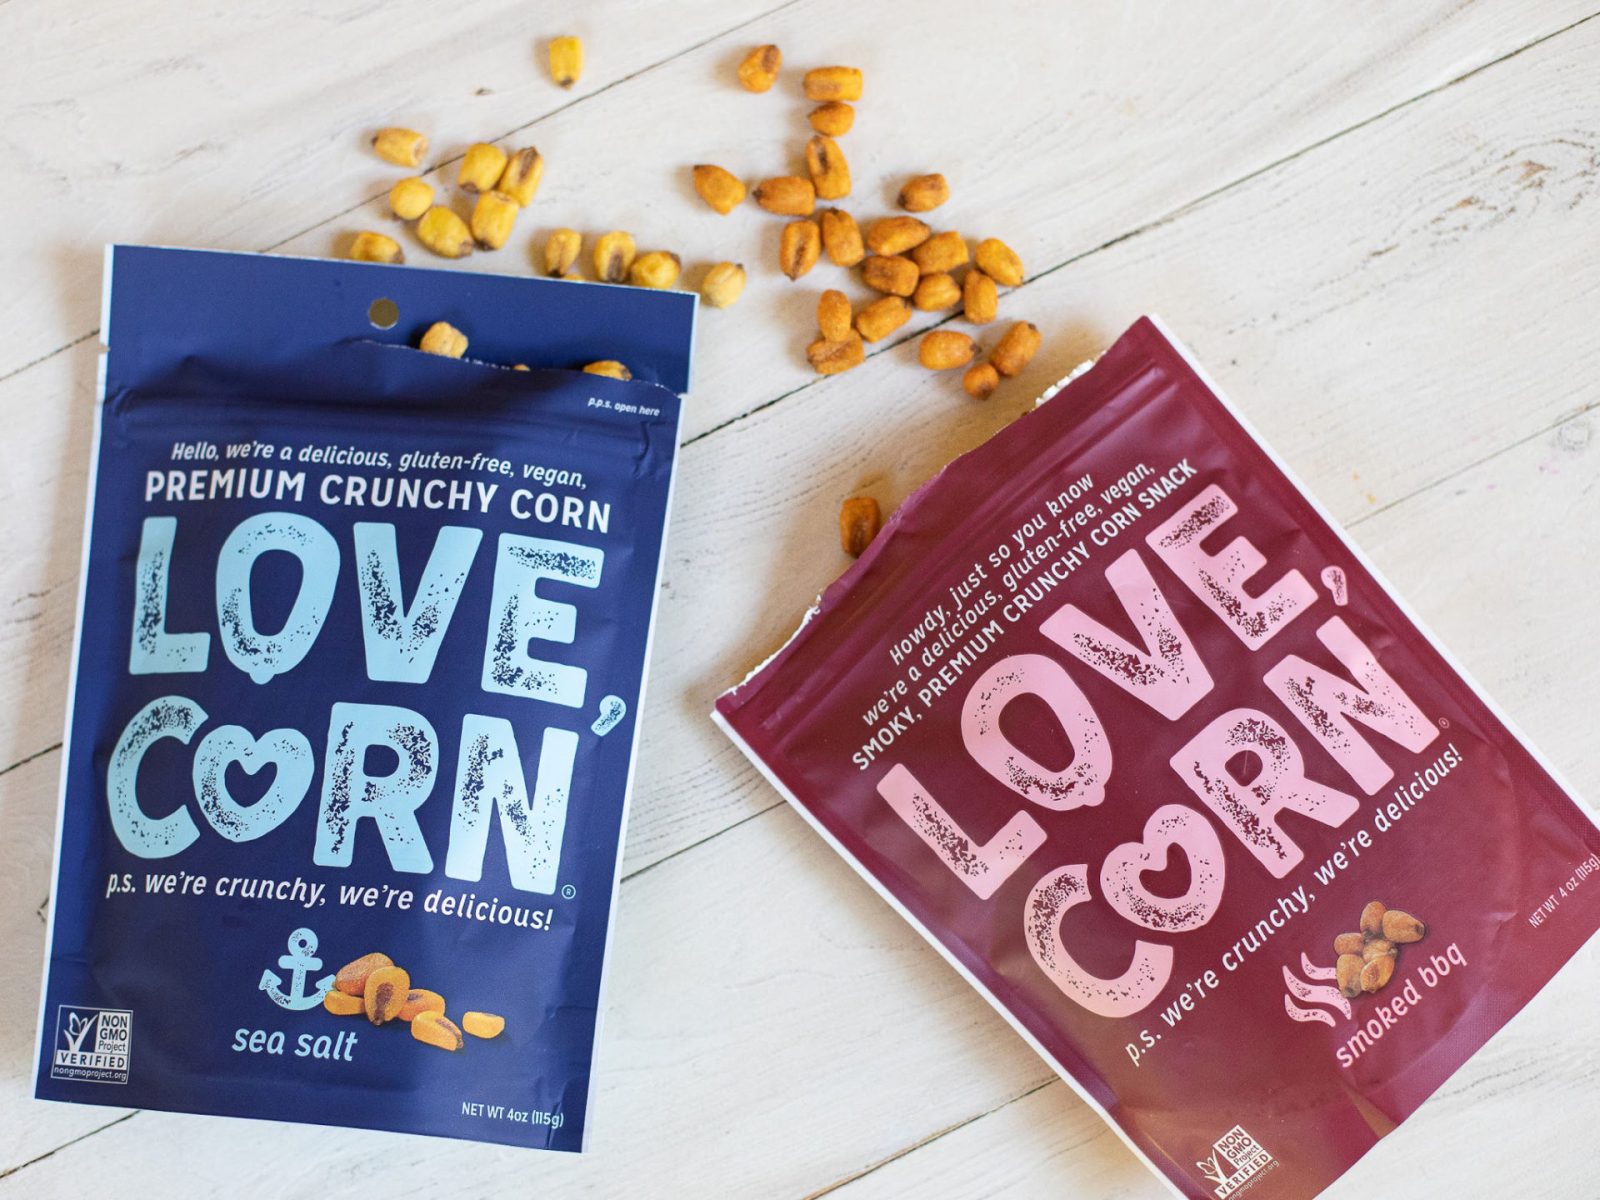 Get The Bags Of Love Corn For $2.29 At Kroger